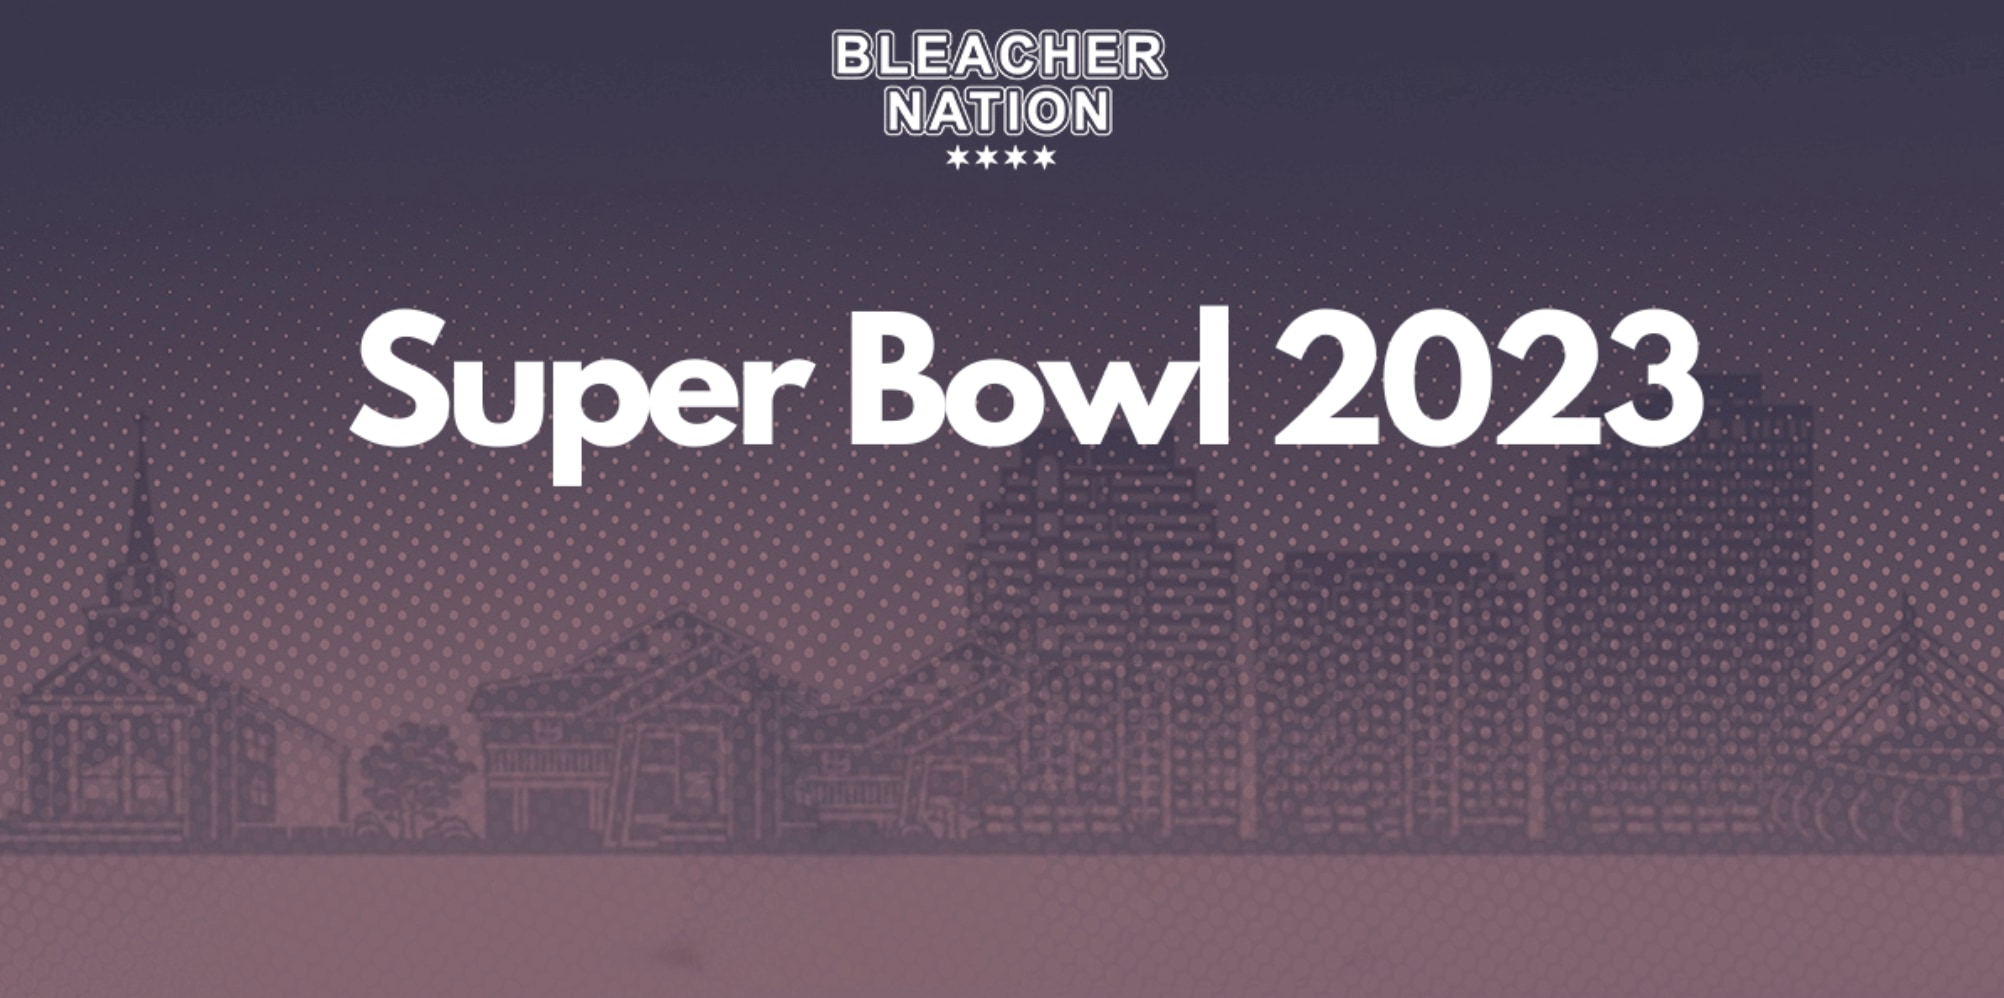 When Is The Super Bowl In 2023? Game's Date, Time And Location